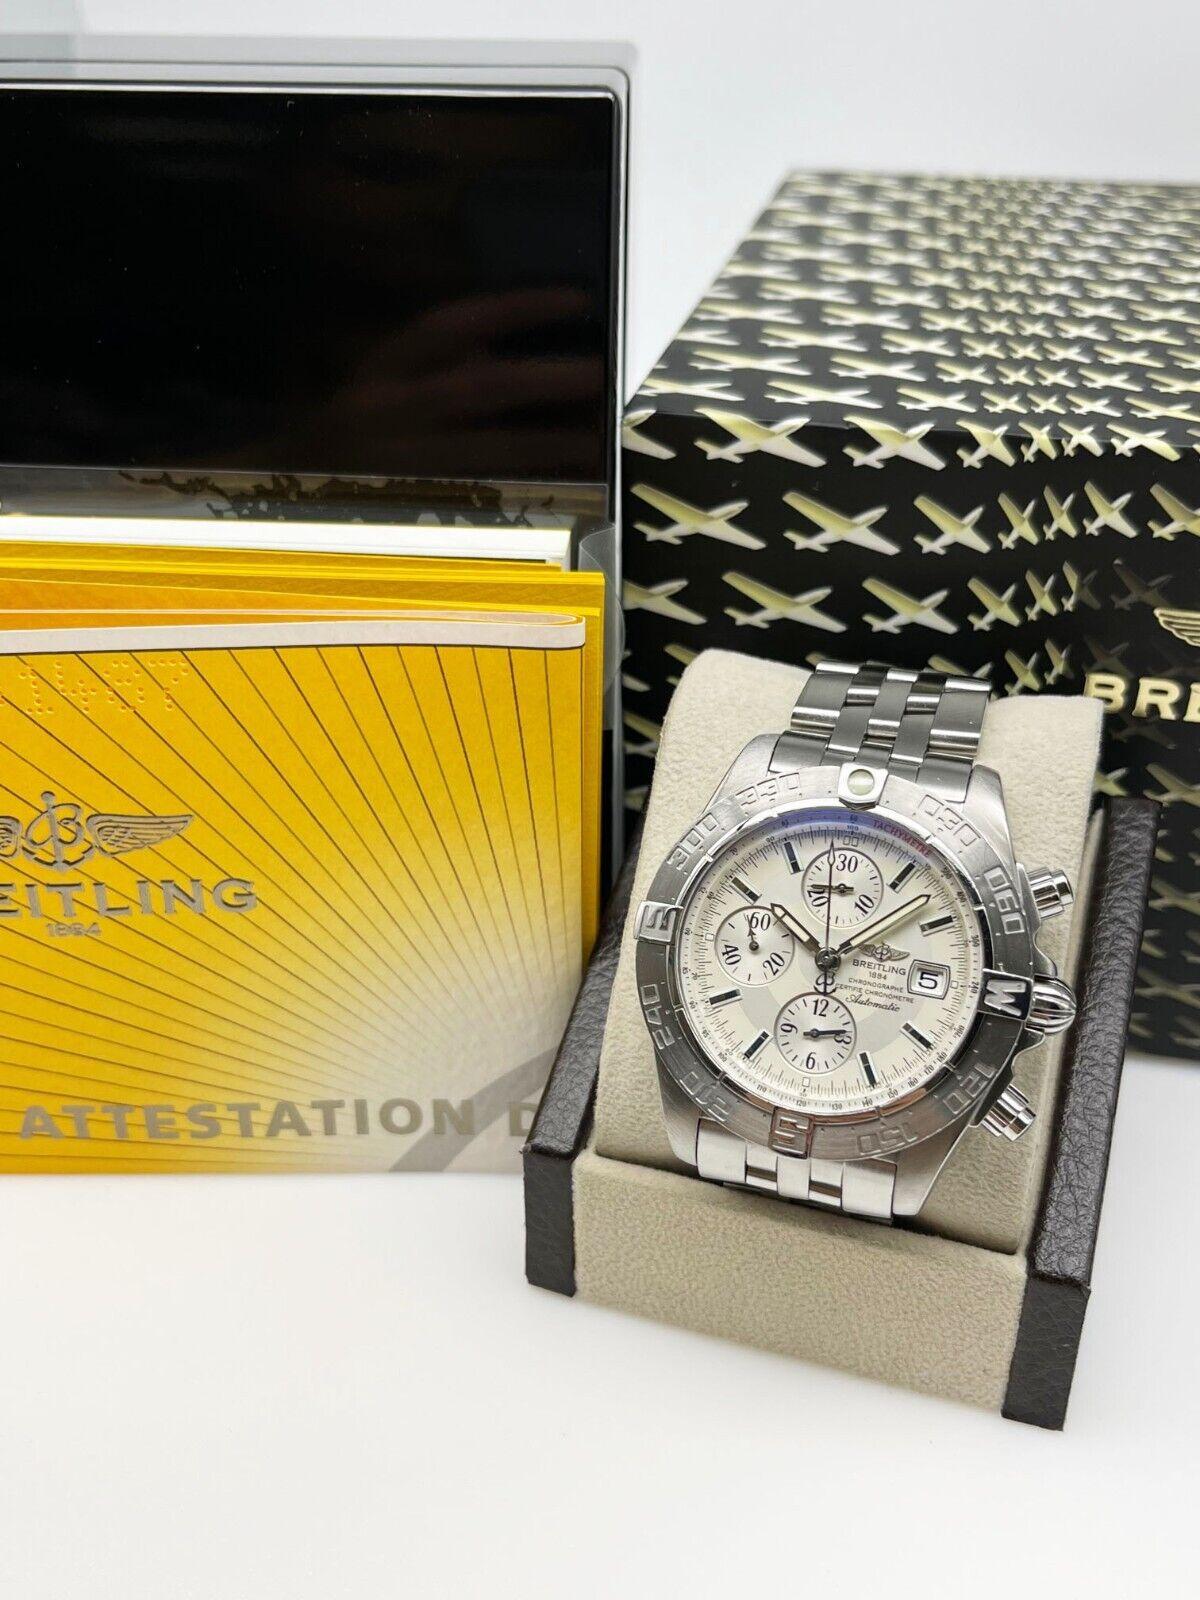 breitling box for sale